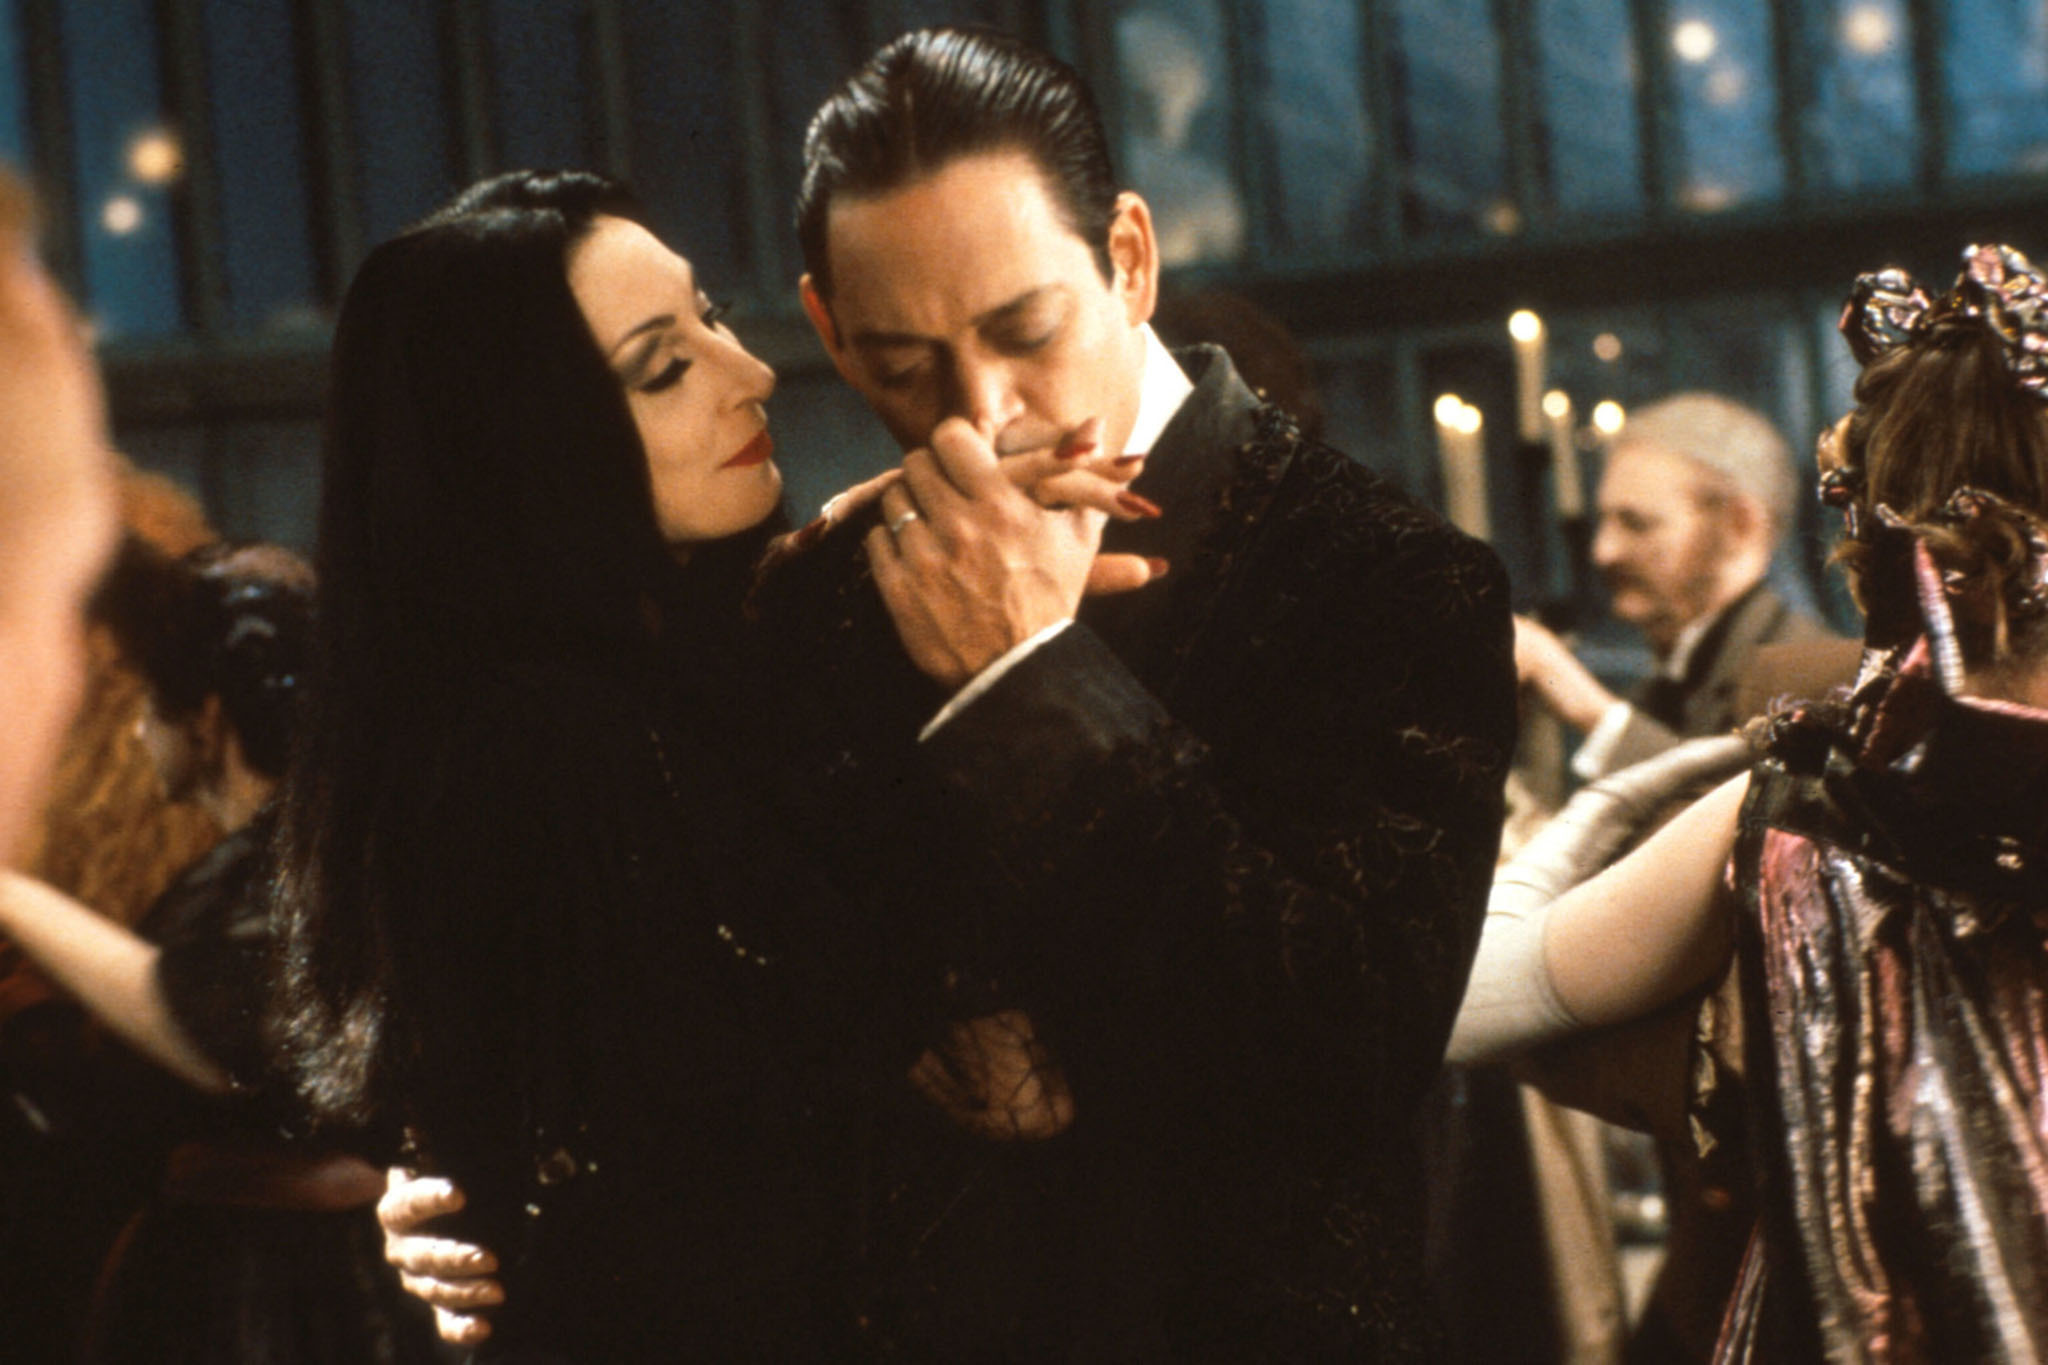 The Addams Family 1991, directed by Barry Sonnenfeld | Film review